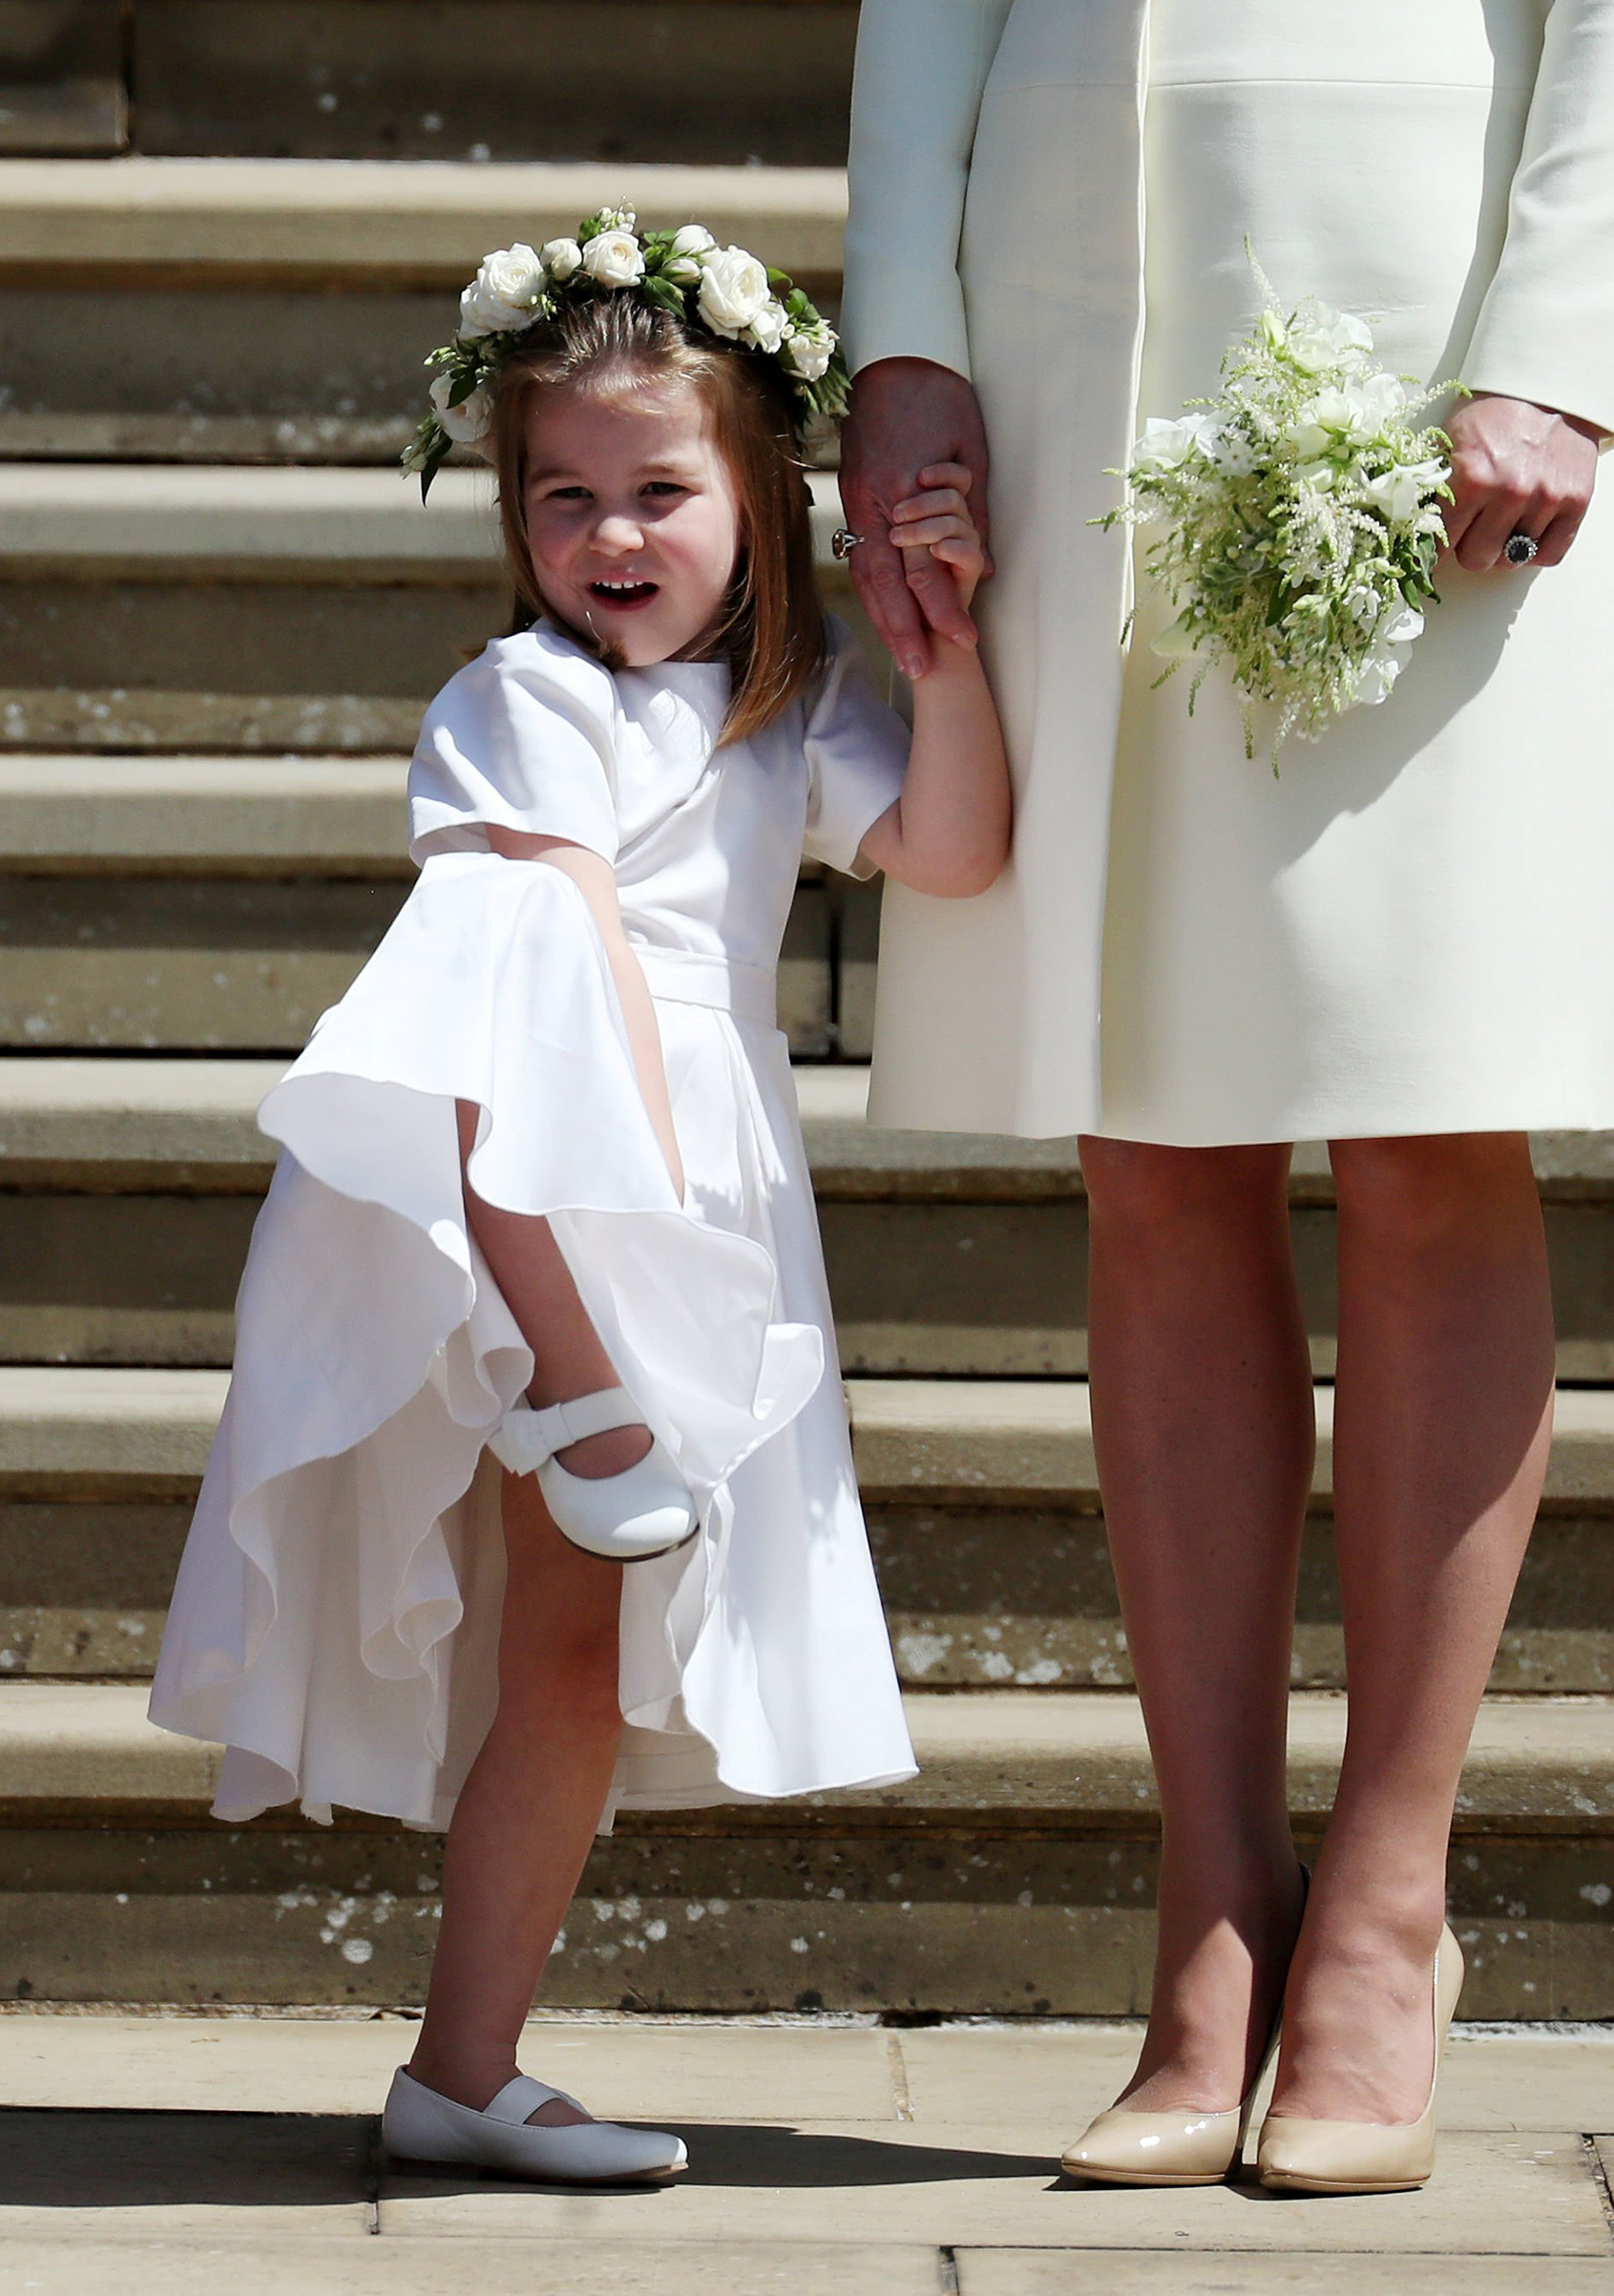 Princess Charlotte on the steps of St George's Chapel in Windsor Castle after the wedding of Prince Harry and Meghan Markle in Windsor, Britain, May 19, 2018.